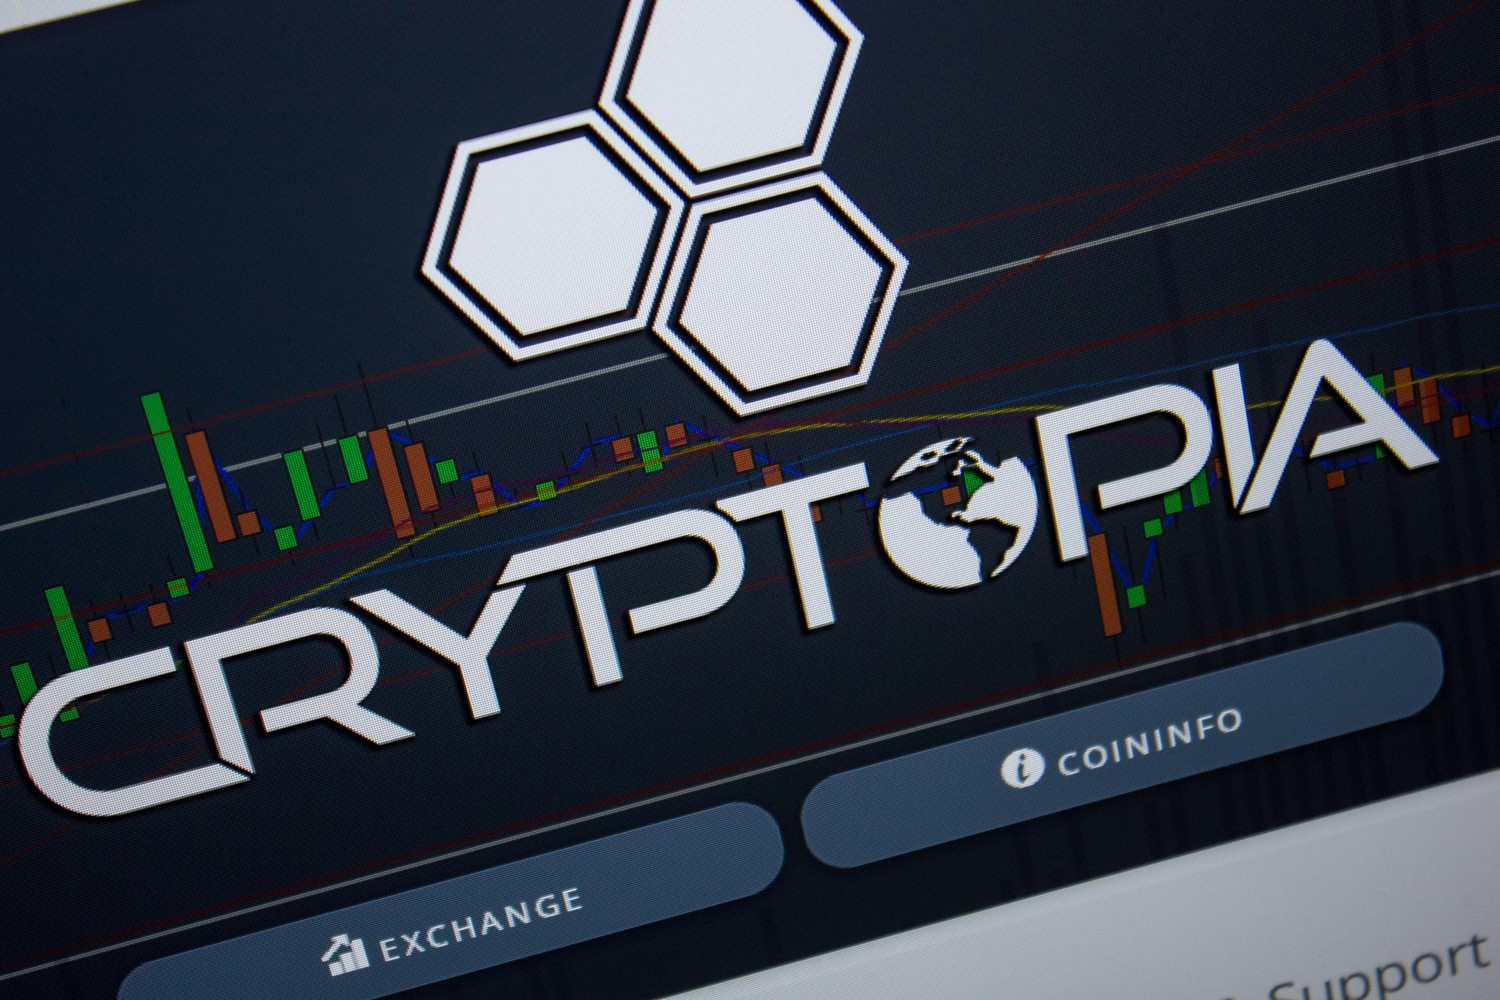 Cryptopia-creditor-issues-legal-notice-to-liquidator-over-alleged-failures,-fees